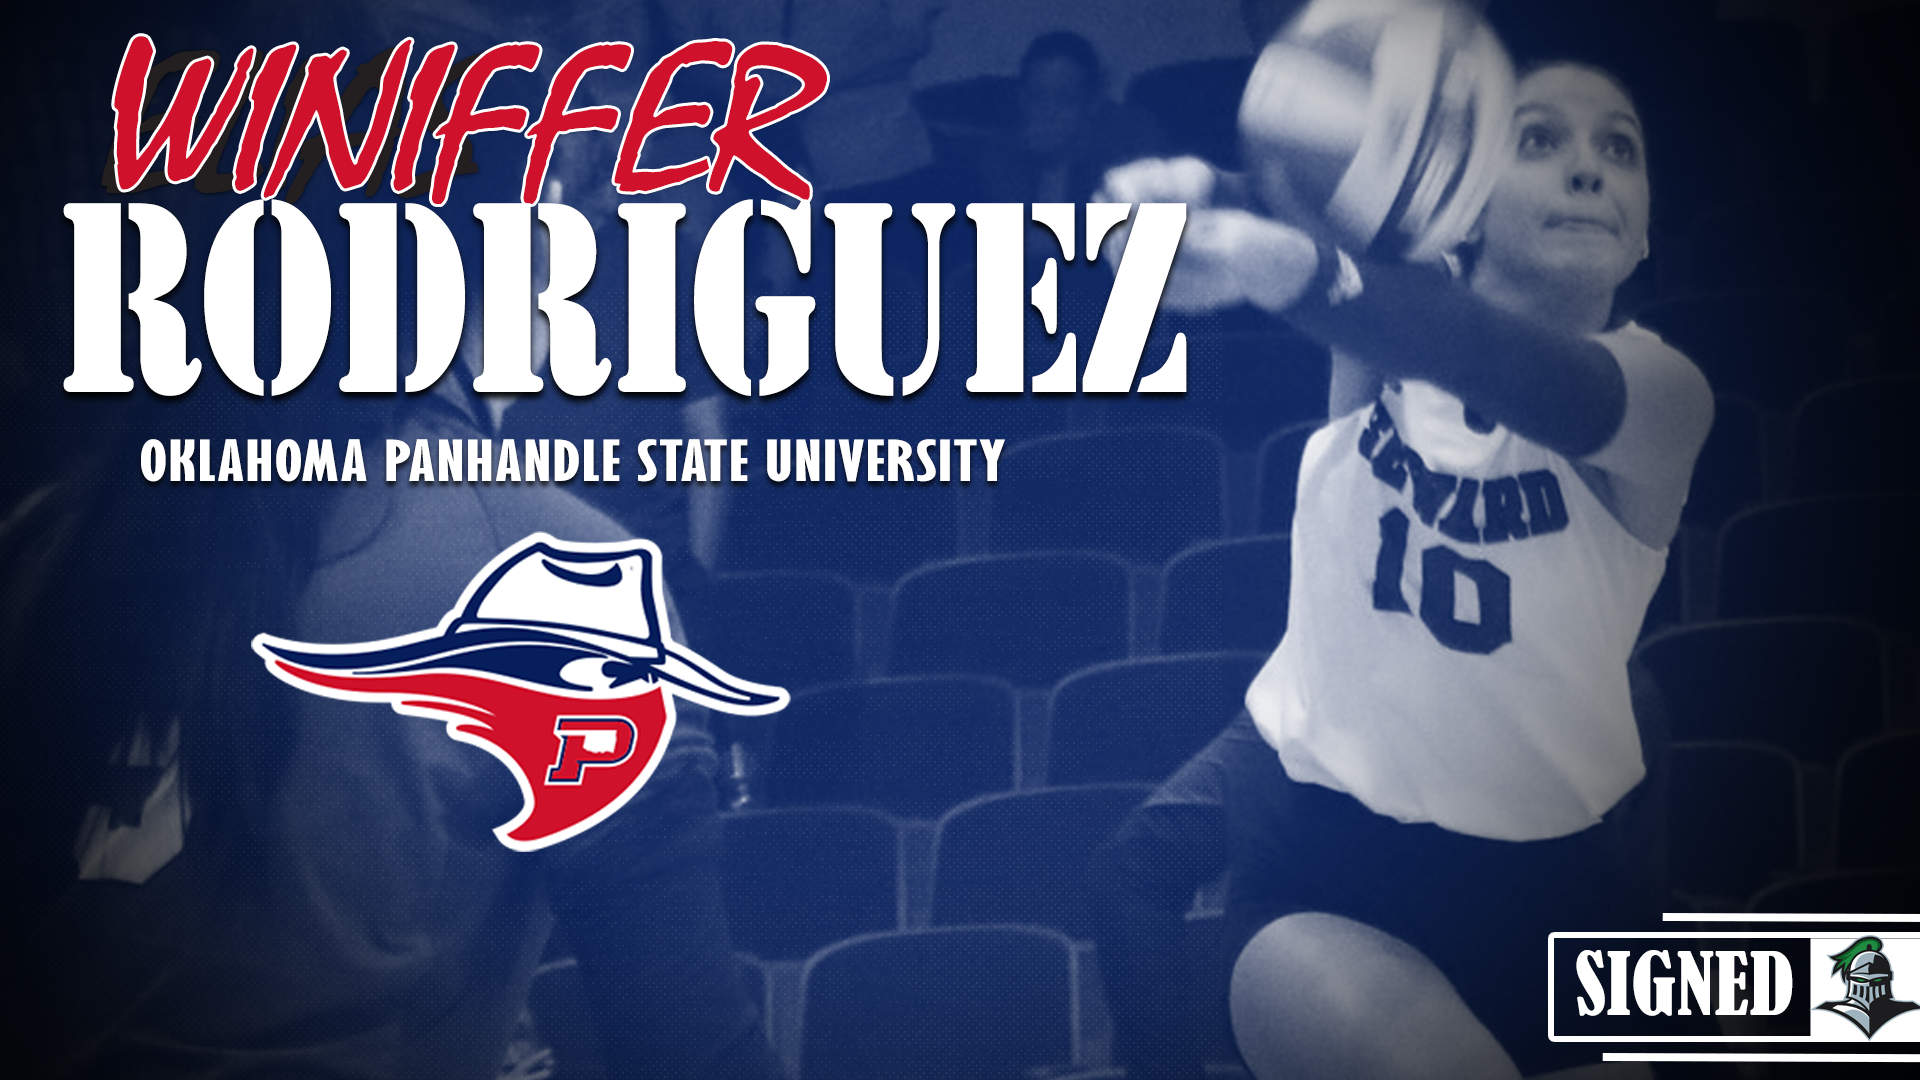 Rodriguez Signs with Aggies of OPSU